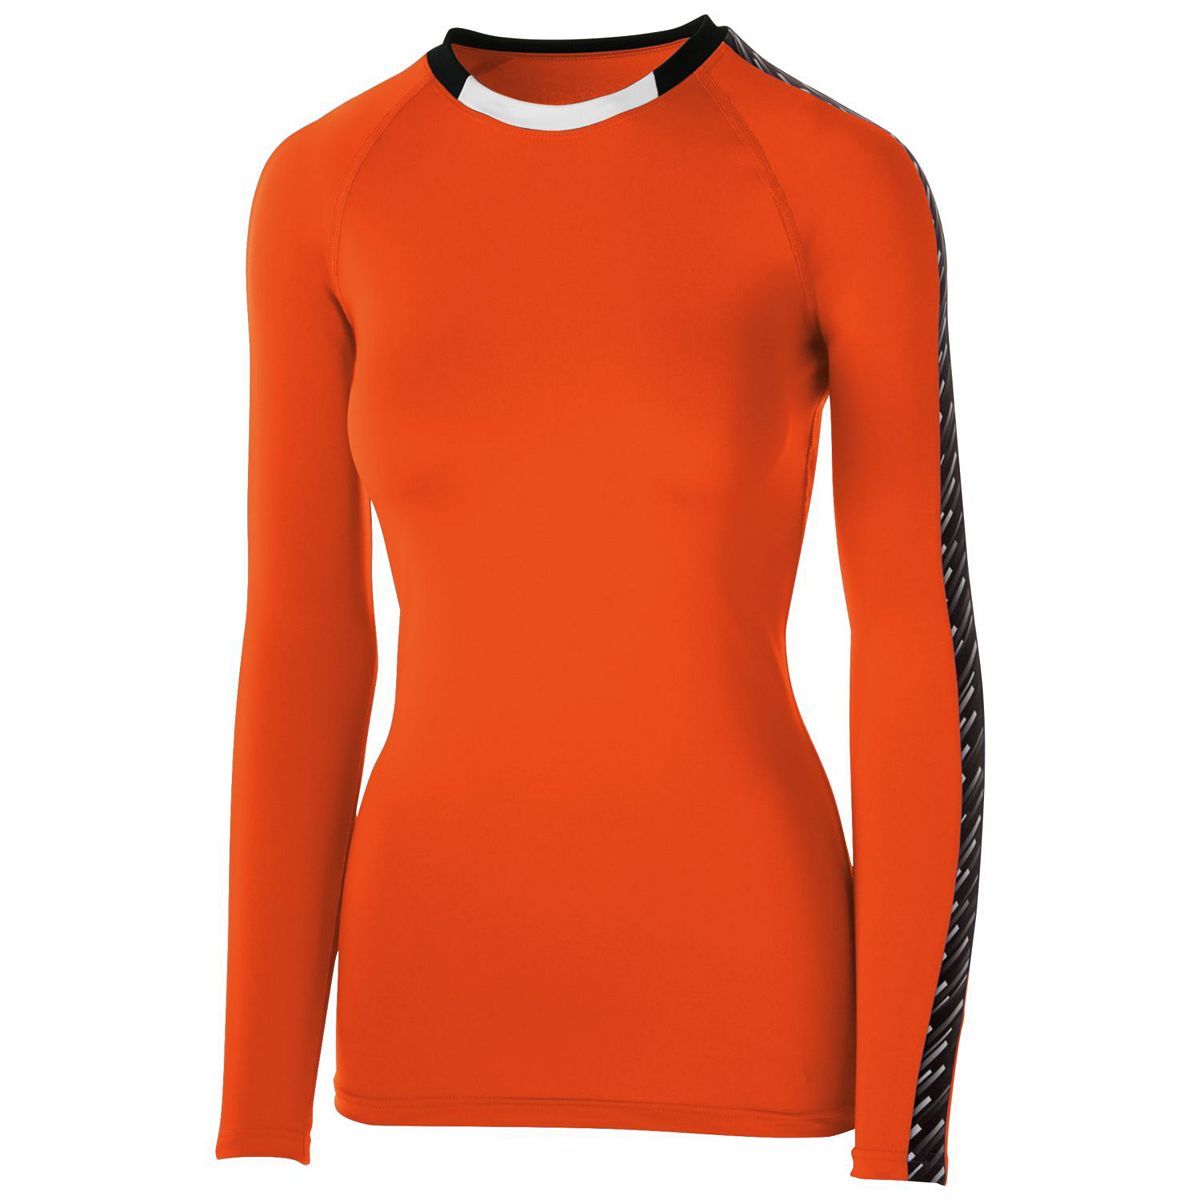 High 5 Girls Spectrum Long Sleeve Jersey in Orange/Black/White  -Part of the Girls, High5-Products, Volleyball, Girls-Jersey, Shirts product lines at KanaleyCreations.com